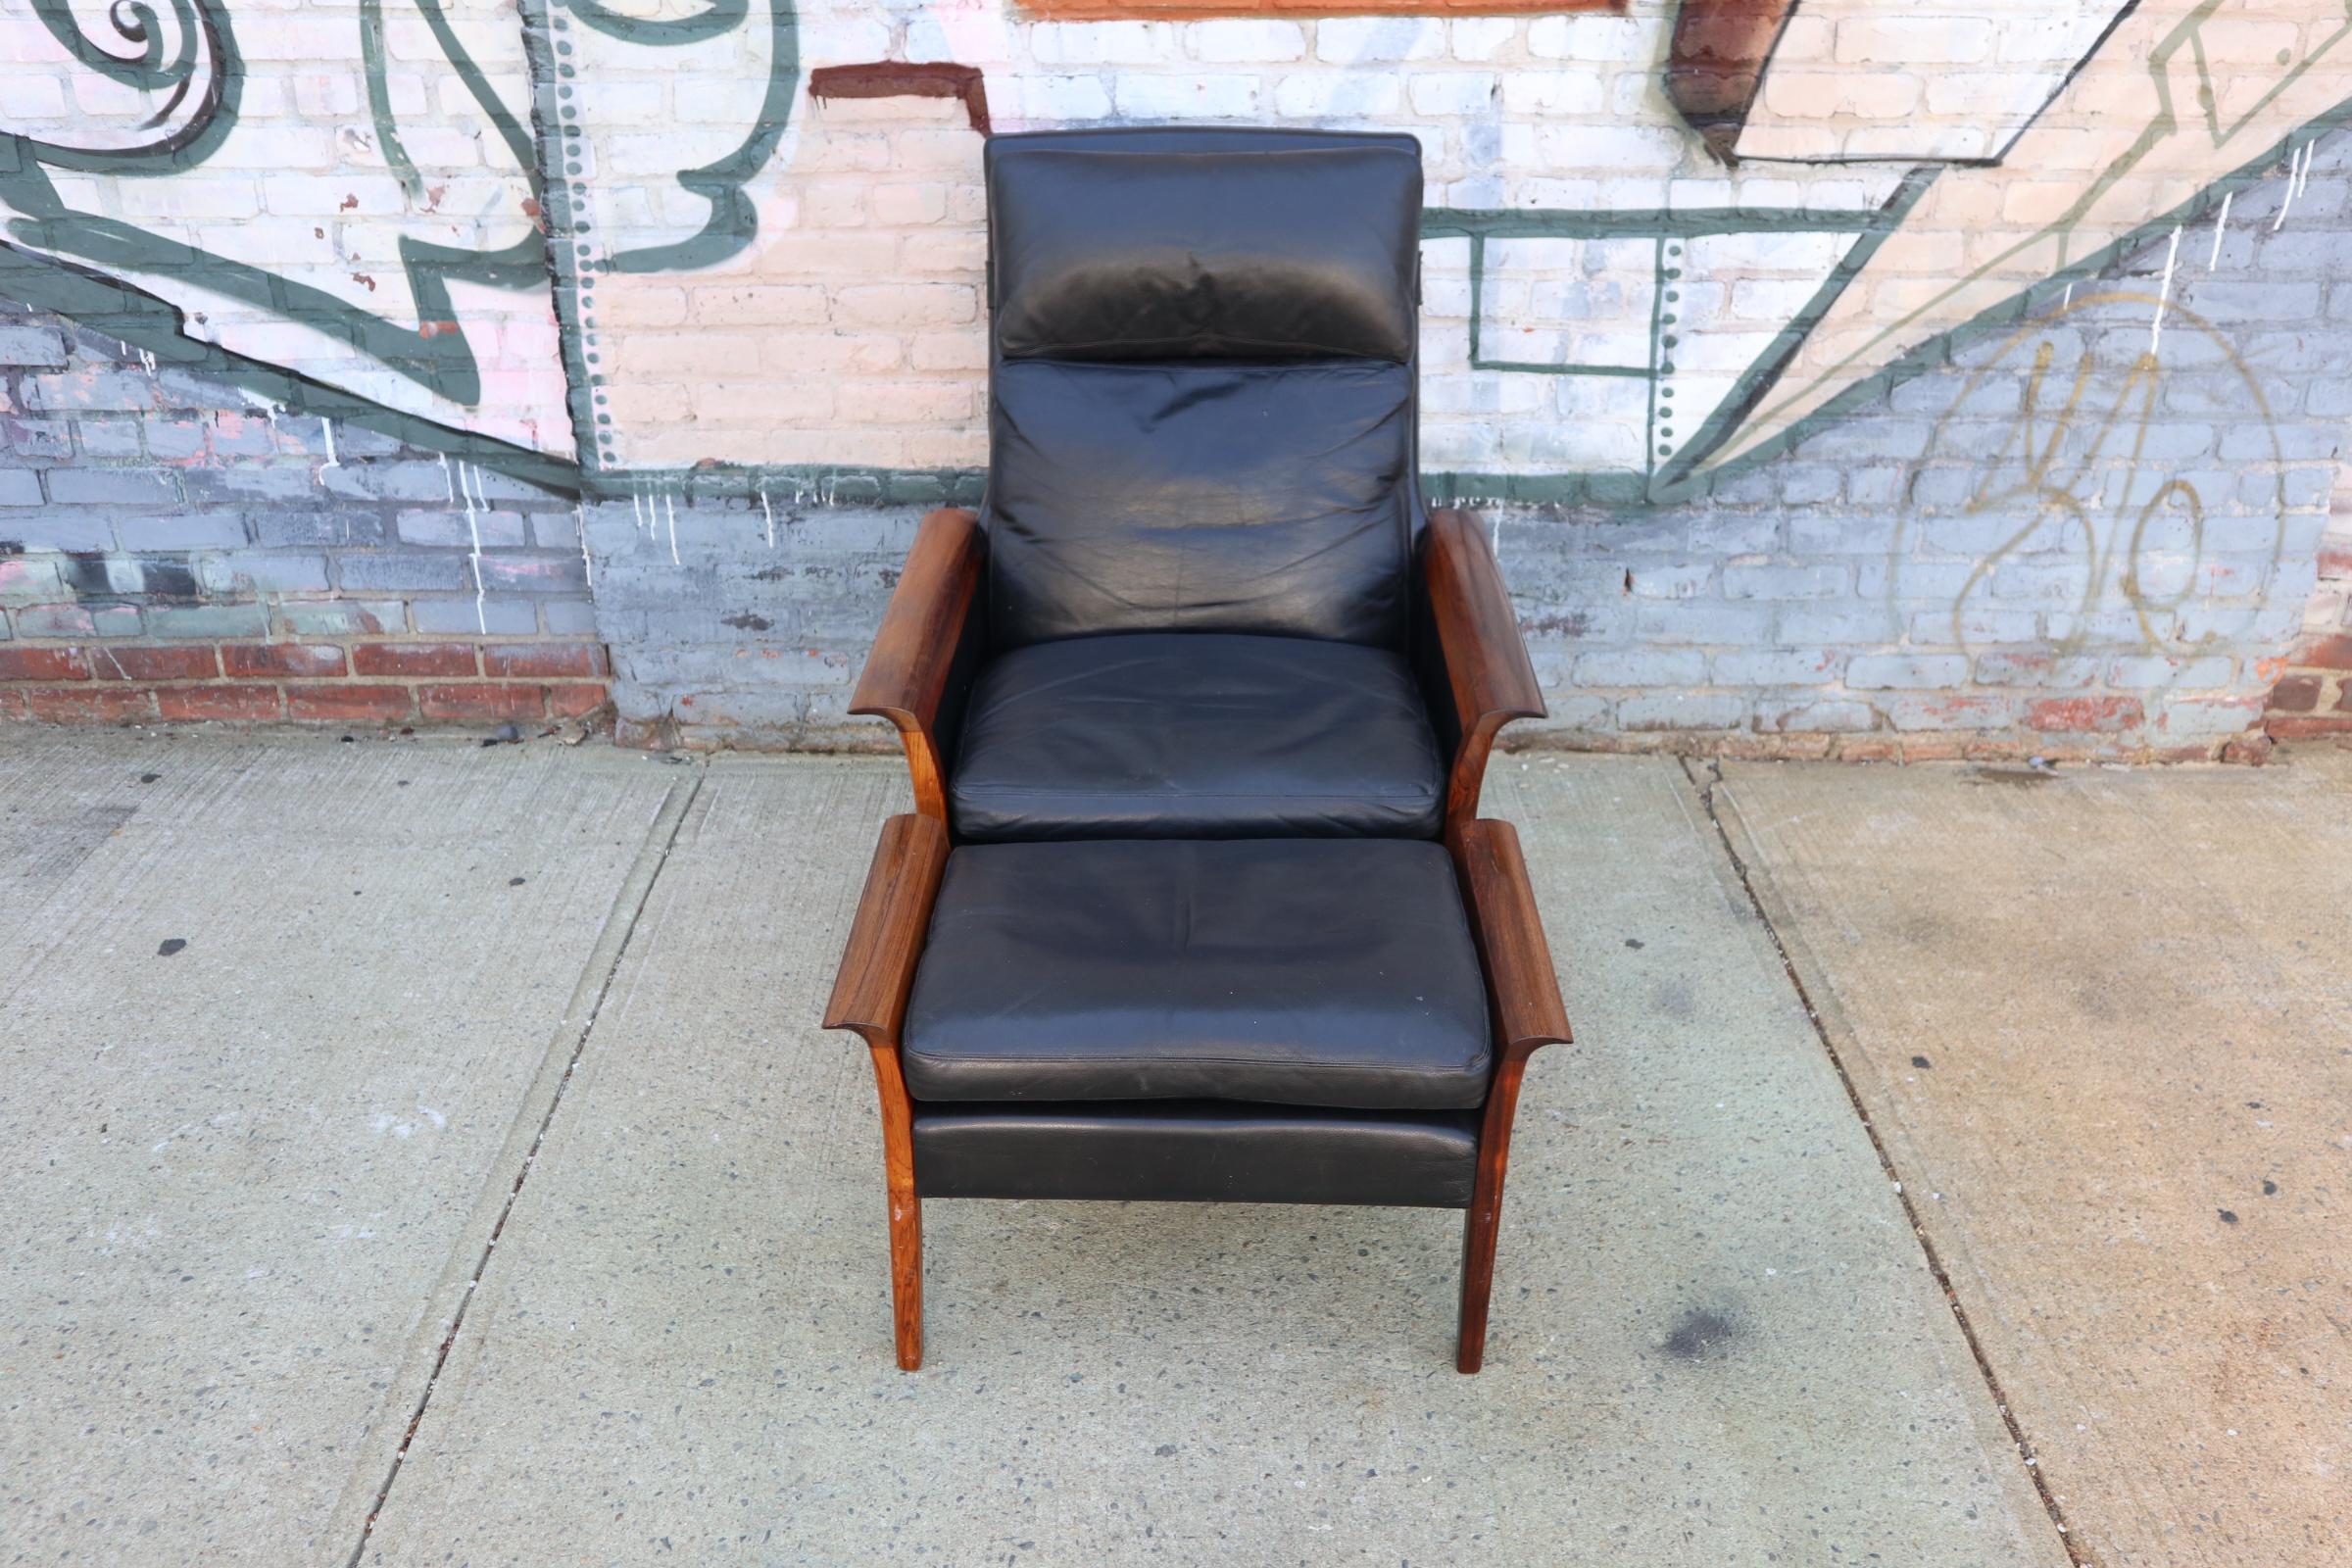 Elegant leather lounge chair and ottoman designed by Hans Olsen for Varner Mobler. Original upholstery accented by rich rosewood arms and legs. Deep color and perfectly aged leather combine for comfort in style. Manufacturer’s label to the underside.